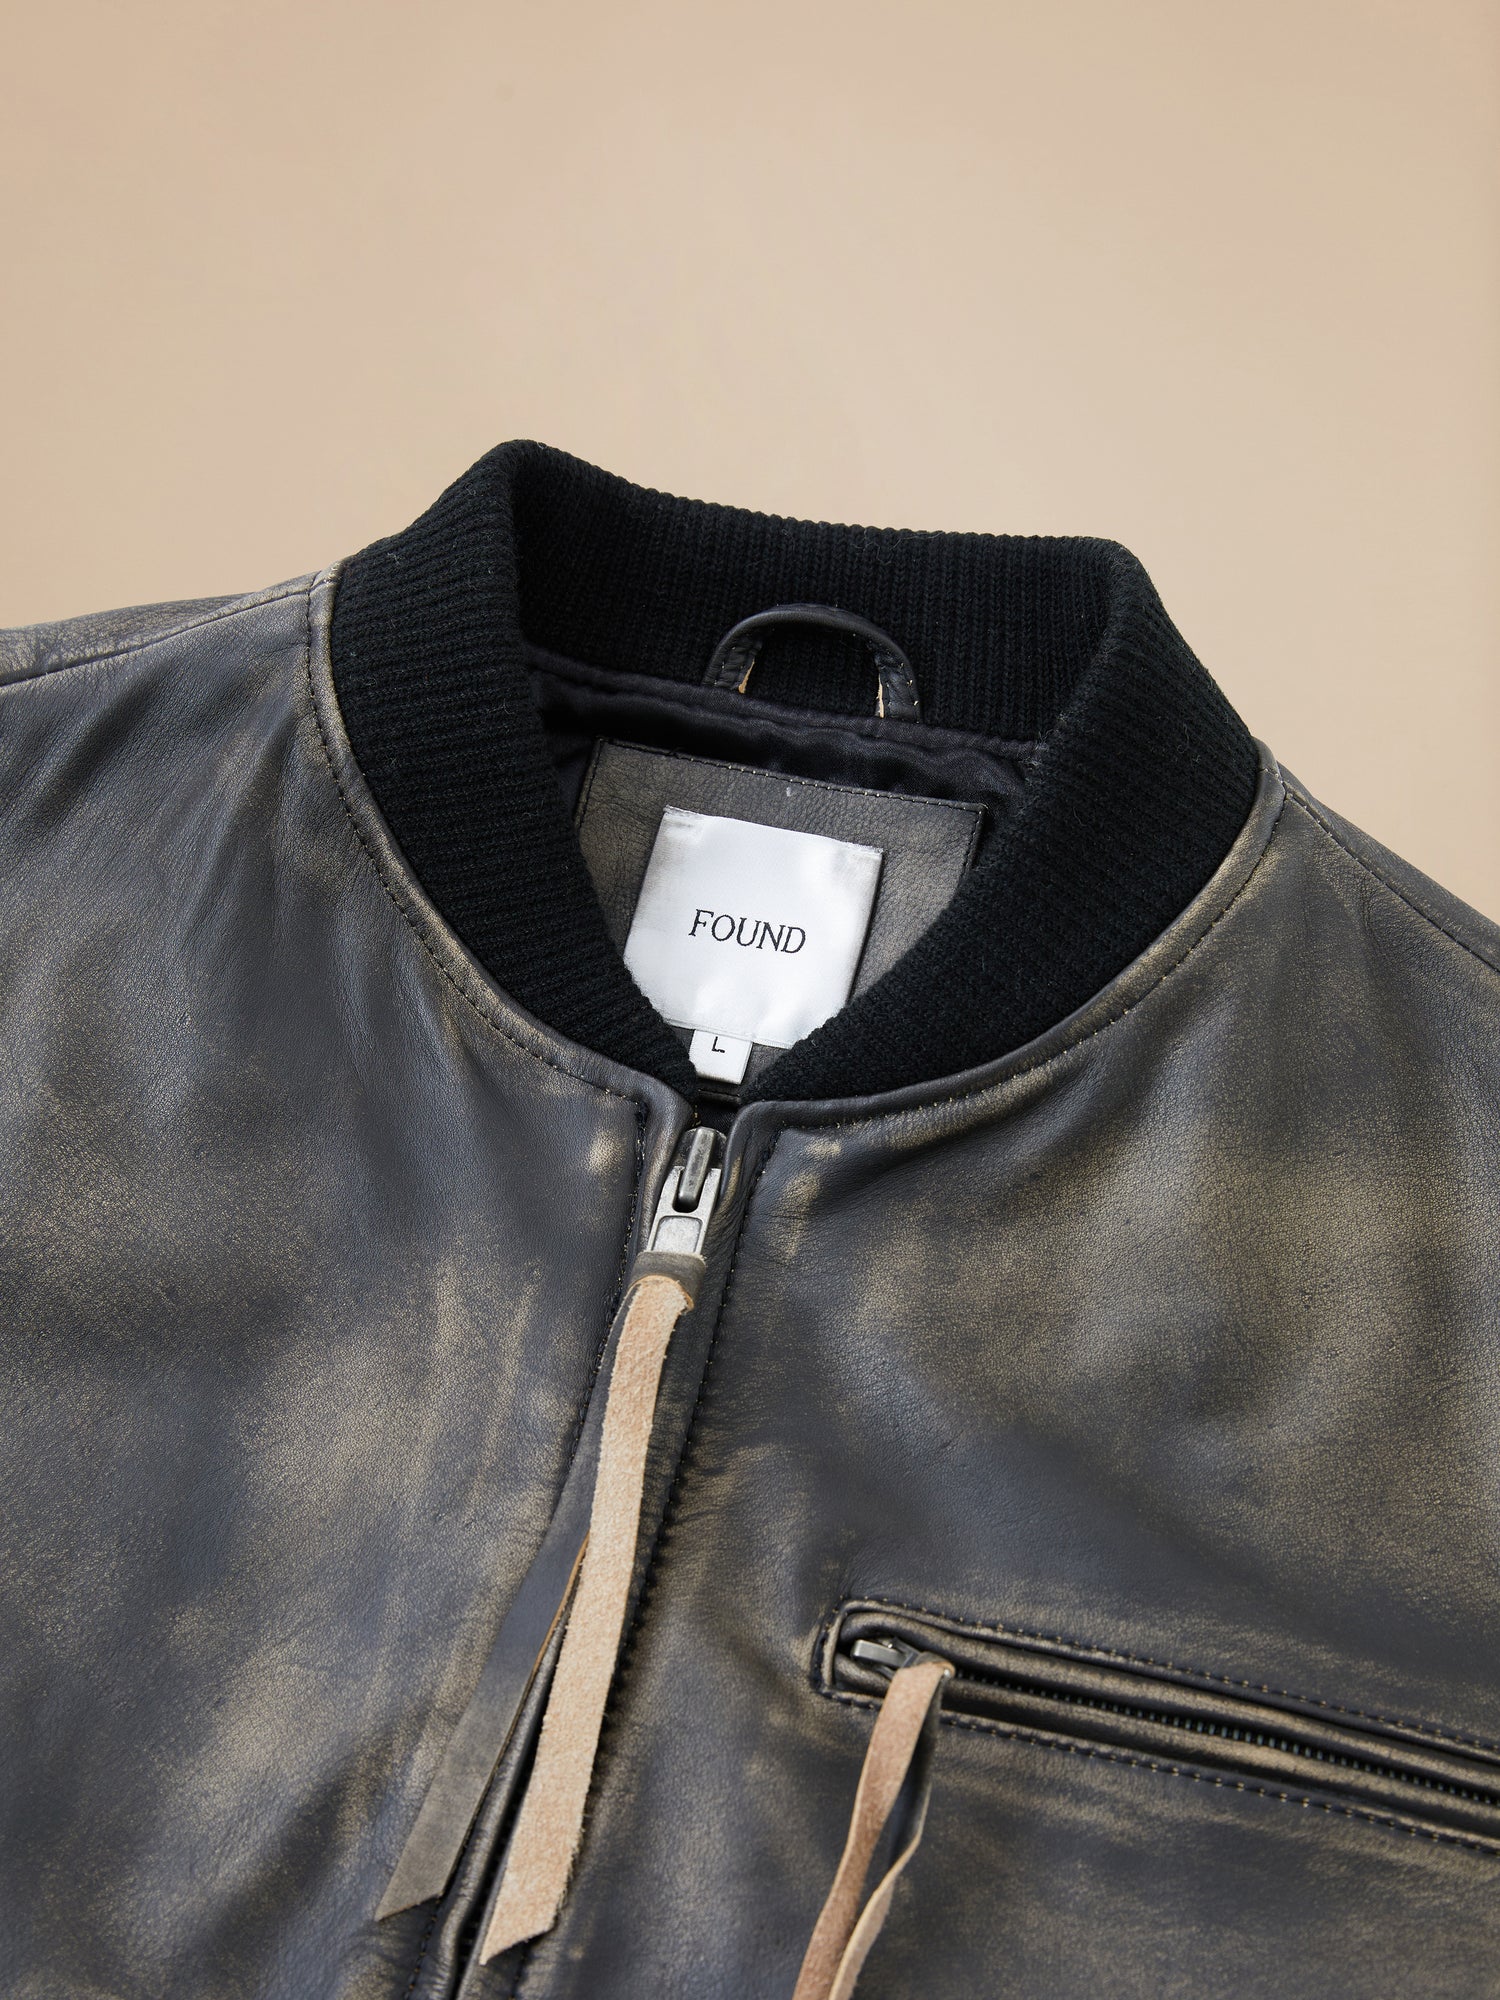 A Distressed Pavement Leather Bomber Jacket by Found on a hanger.